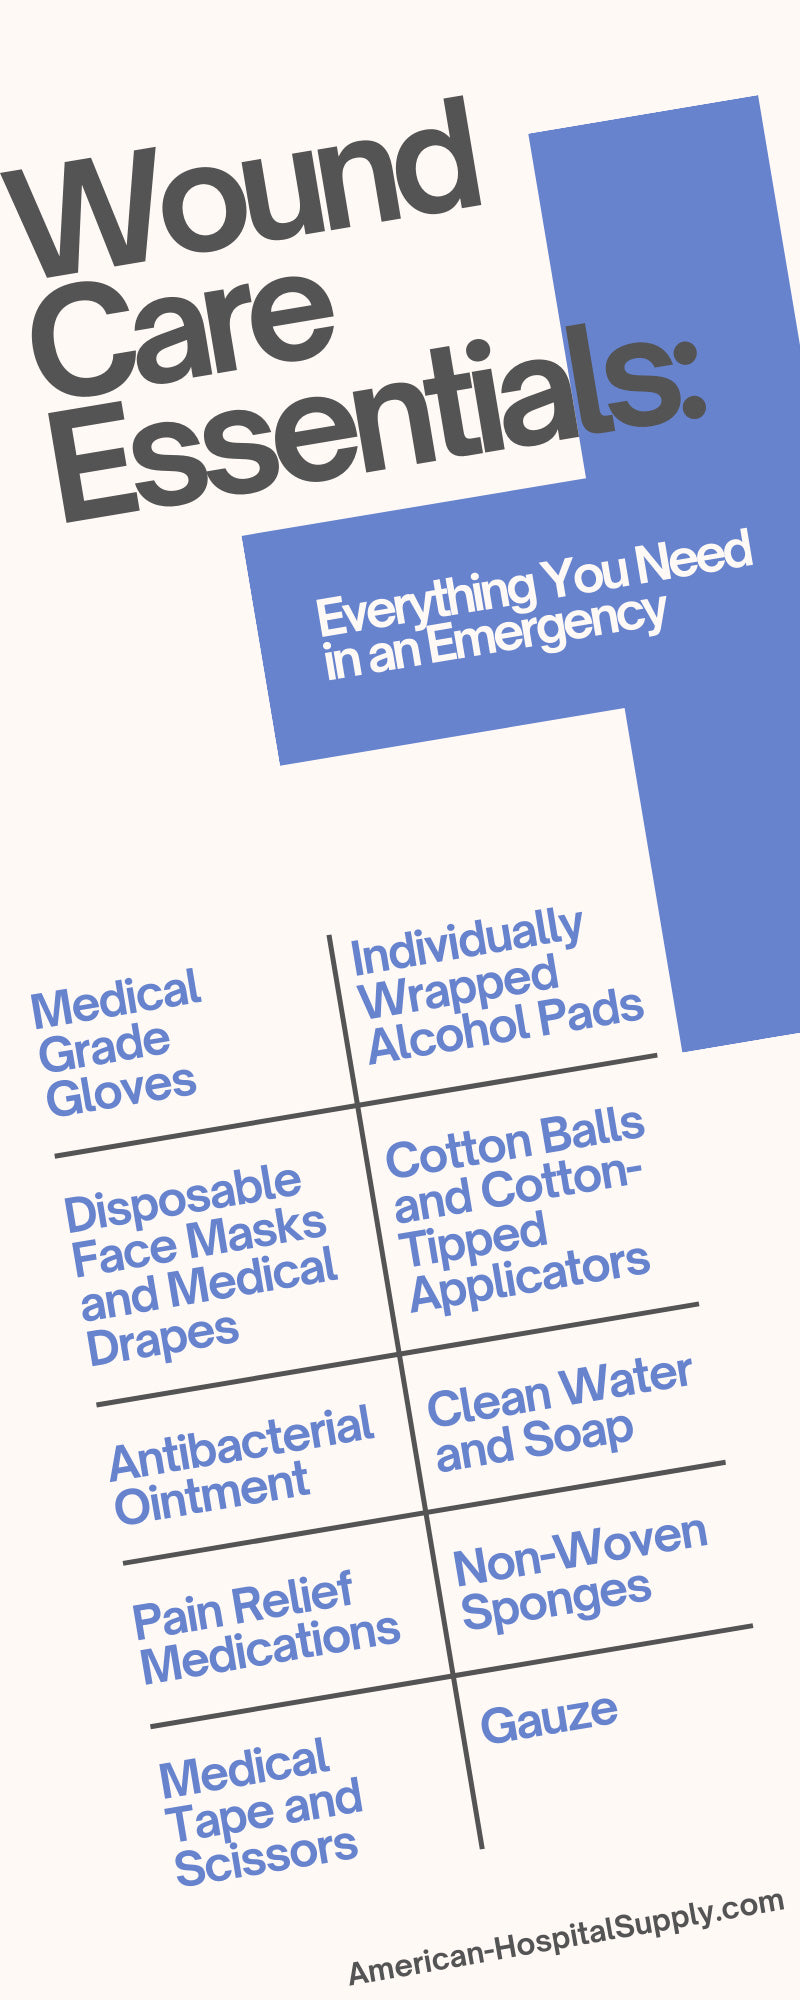 Wound Care Essentials: Everything You Need in an Emergency